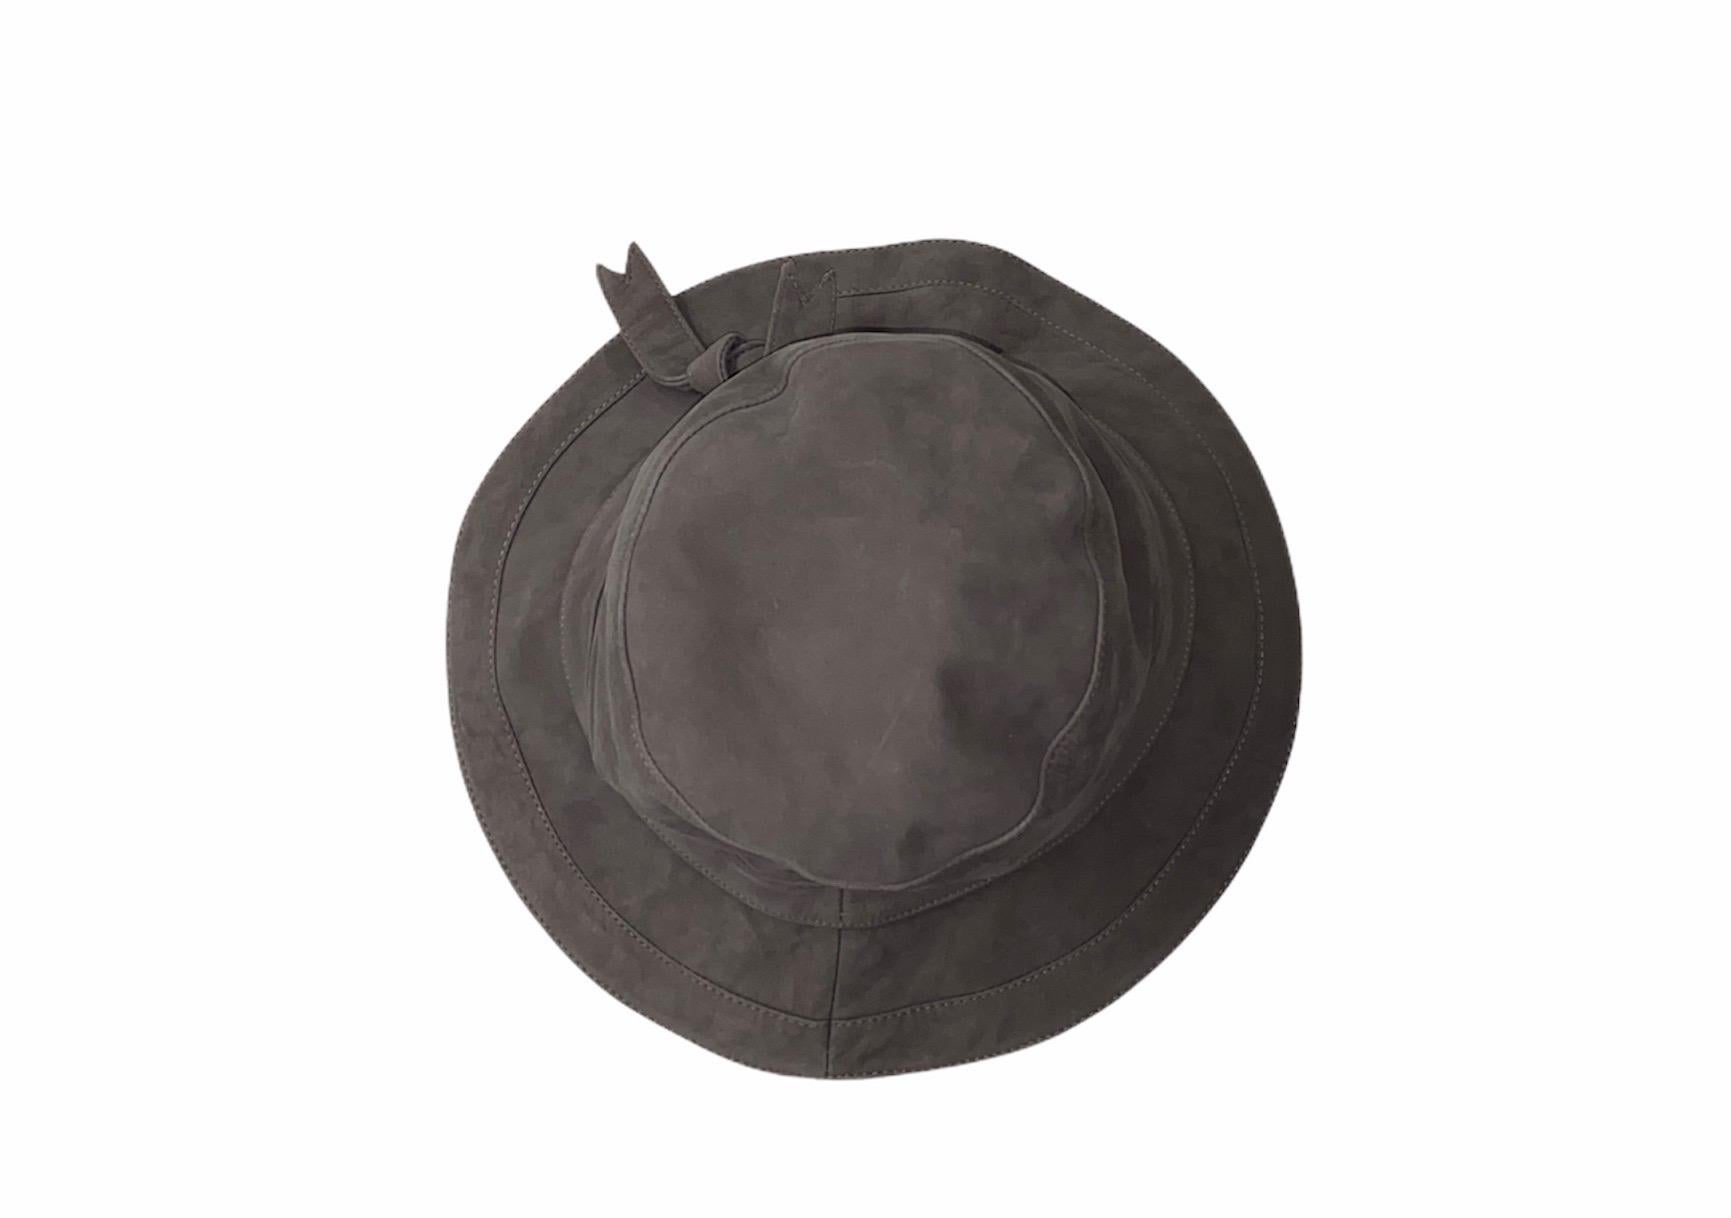 HERMES Paris Leather Hat
Made of finest, soft lambskin leather
Fully lined, fabric stamped with „HERMES“
Size 57
Made in France
Dry clean only